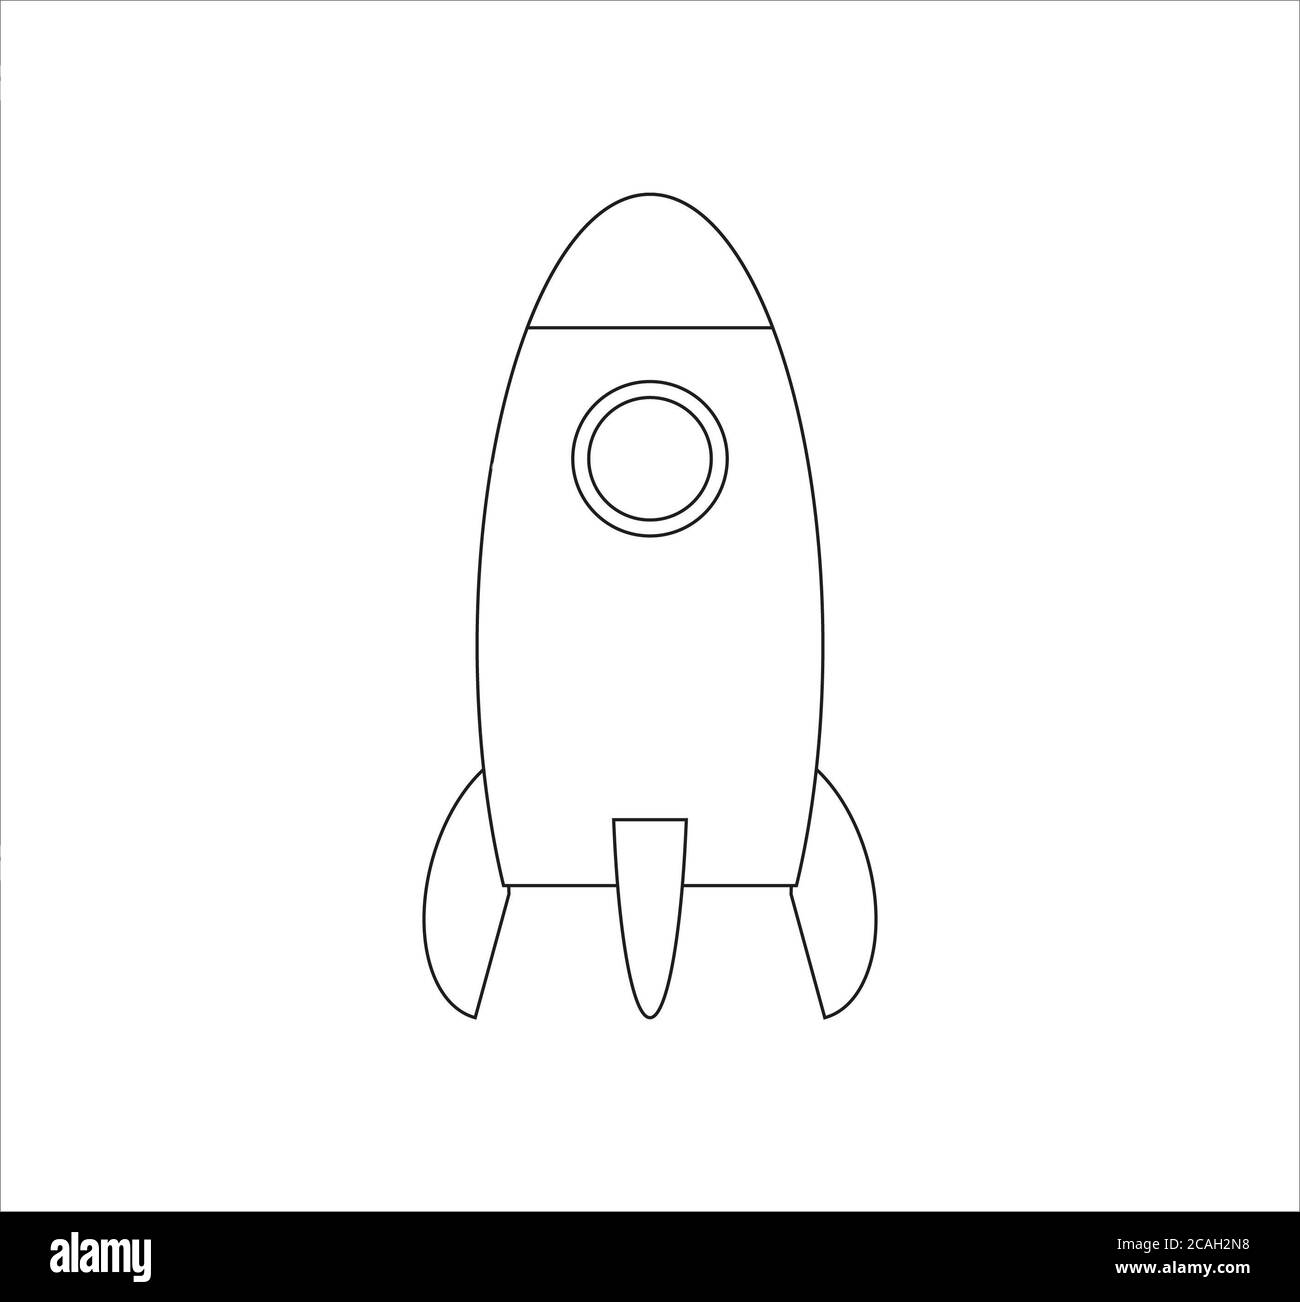 Illustration of a small rocket outline isolated on a white background Stock Photo